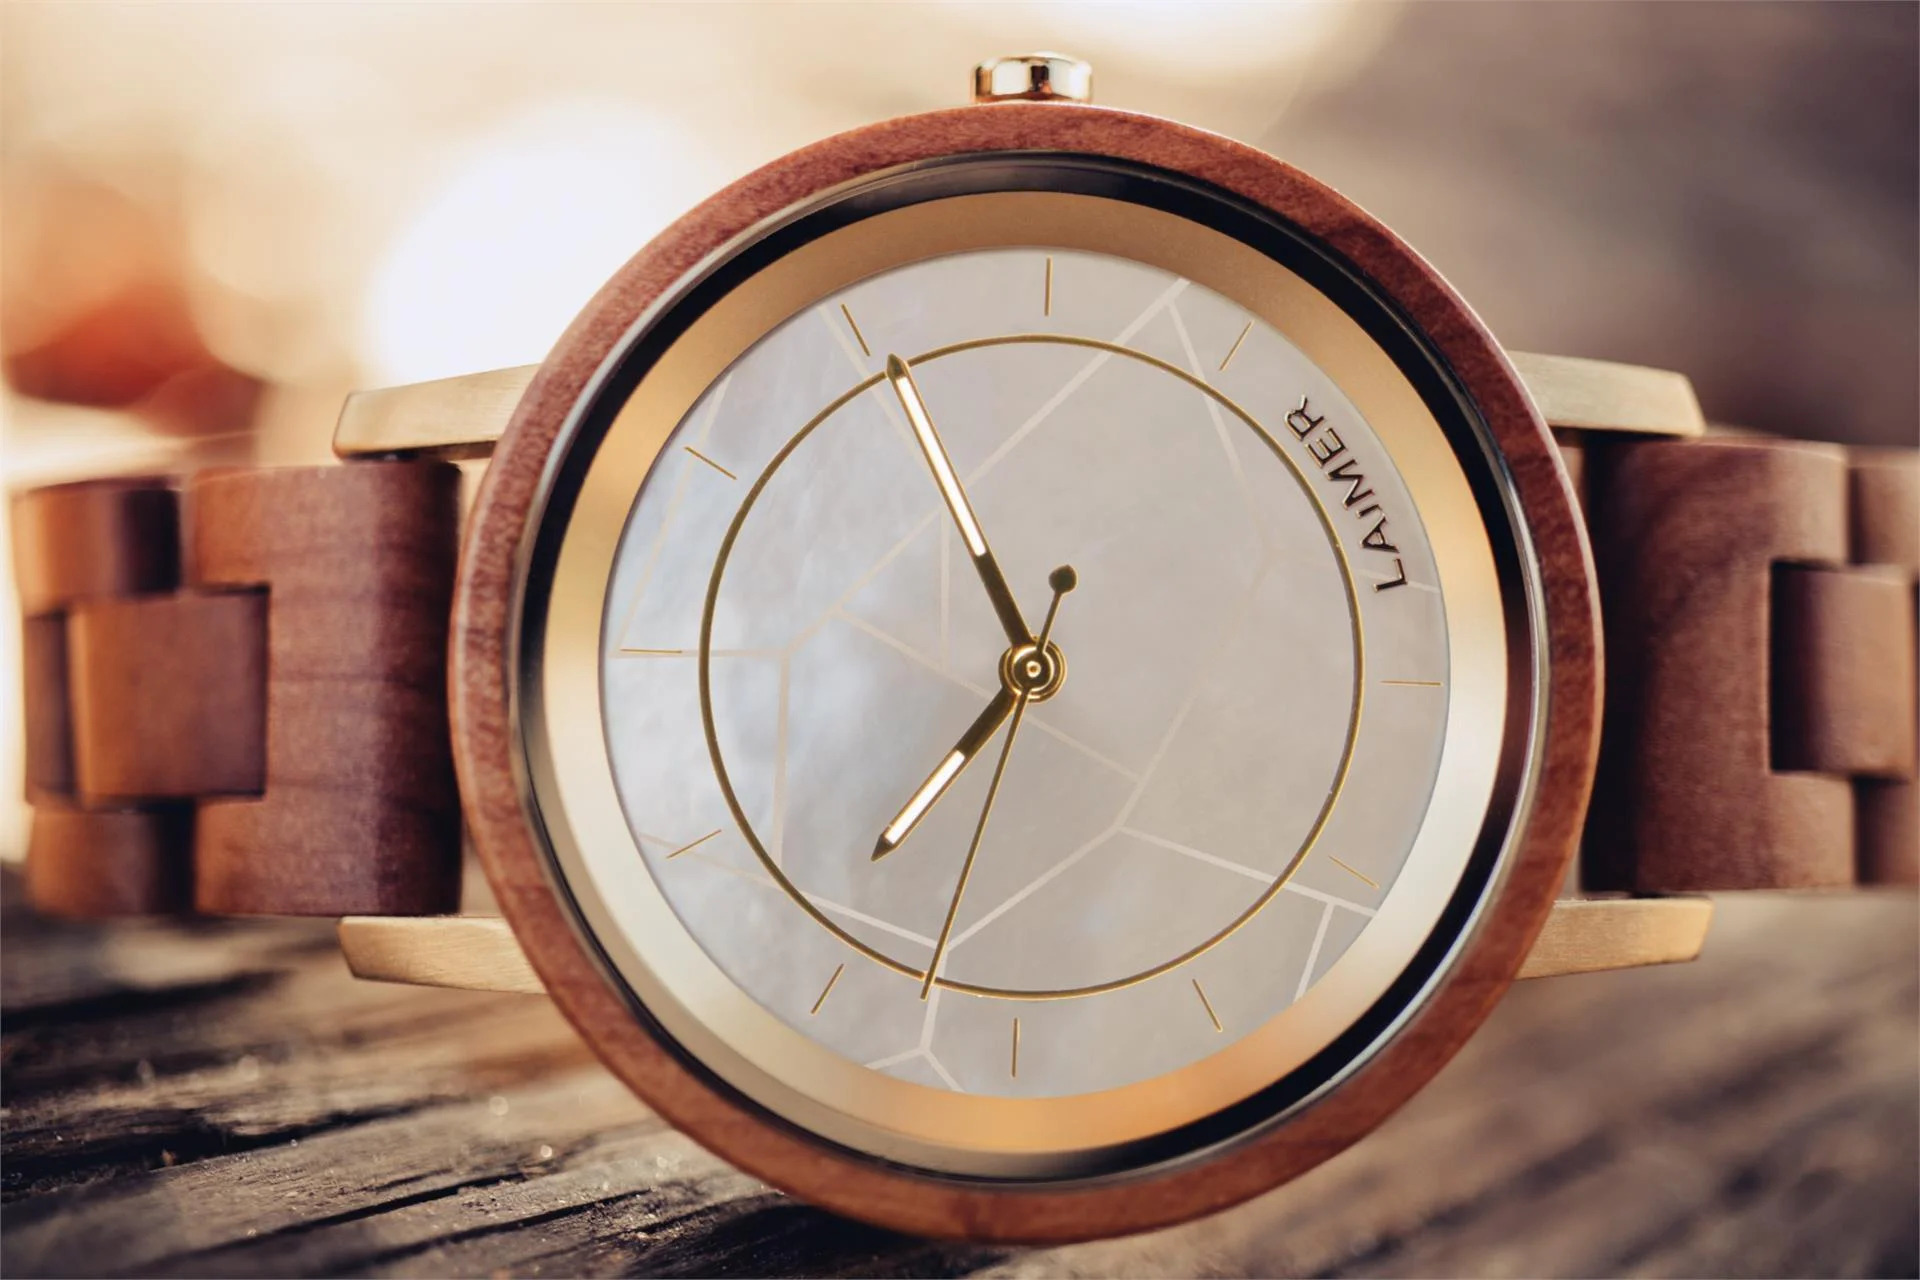 ALEXANDER | automatic men's watch | sustainable accessories | natural  materials | Laimer woodwatch - YouTube